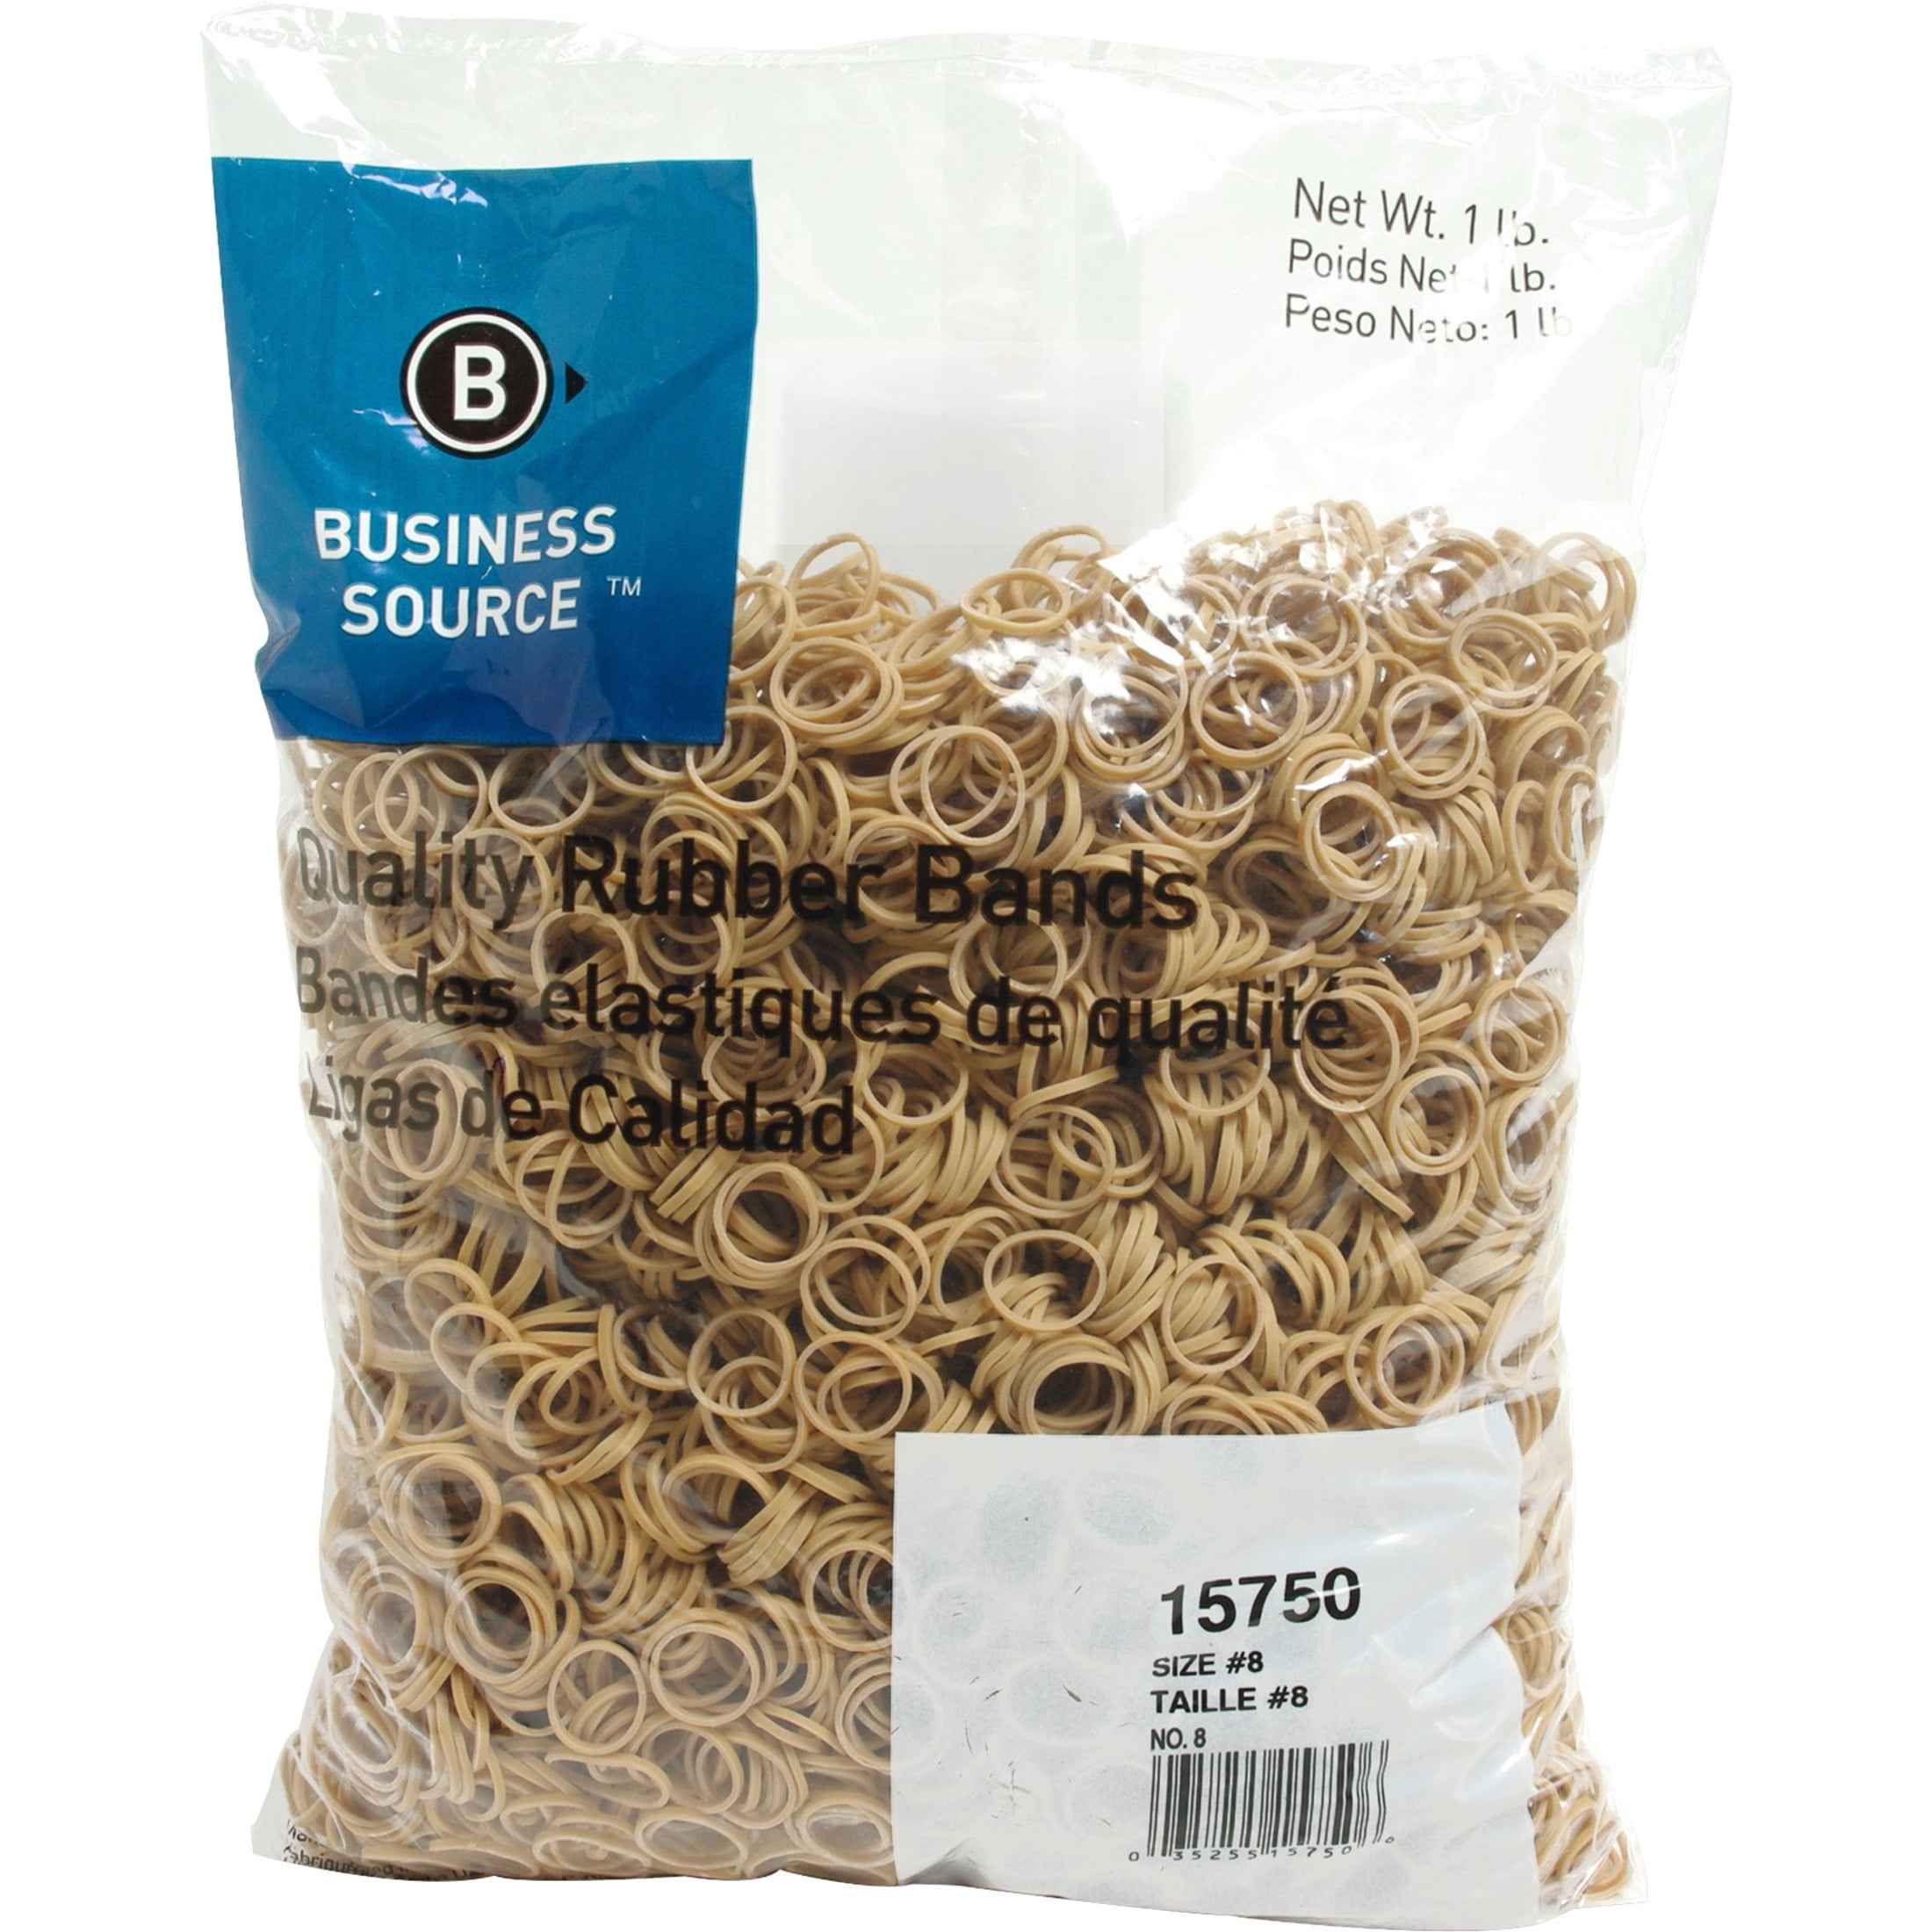 Bsn15750 for sale online Business Source Quality Rubber Bands 